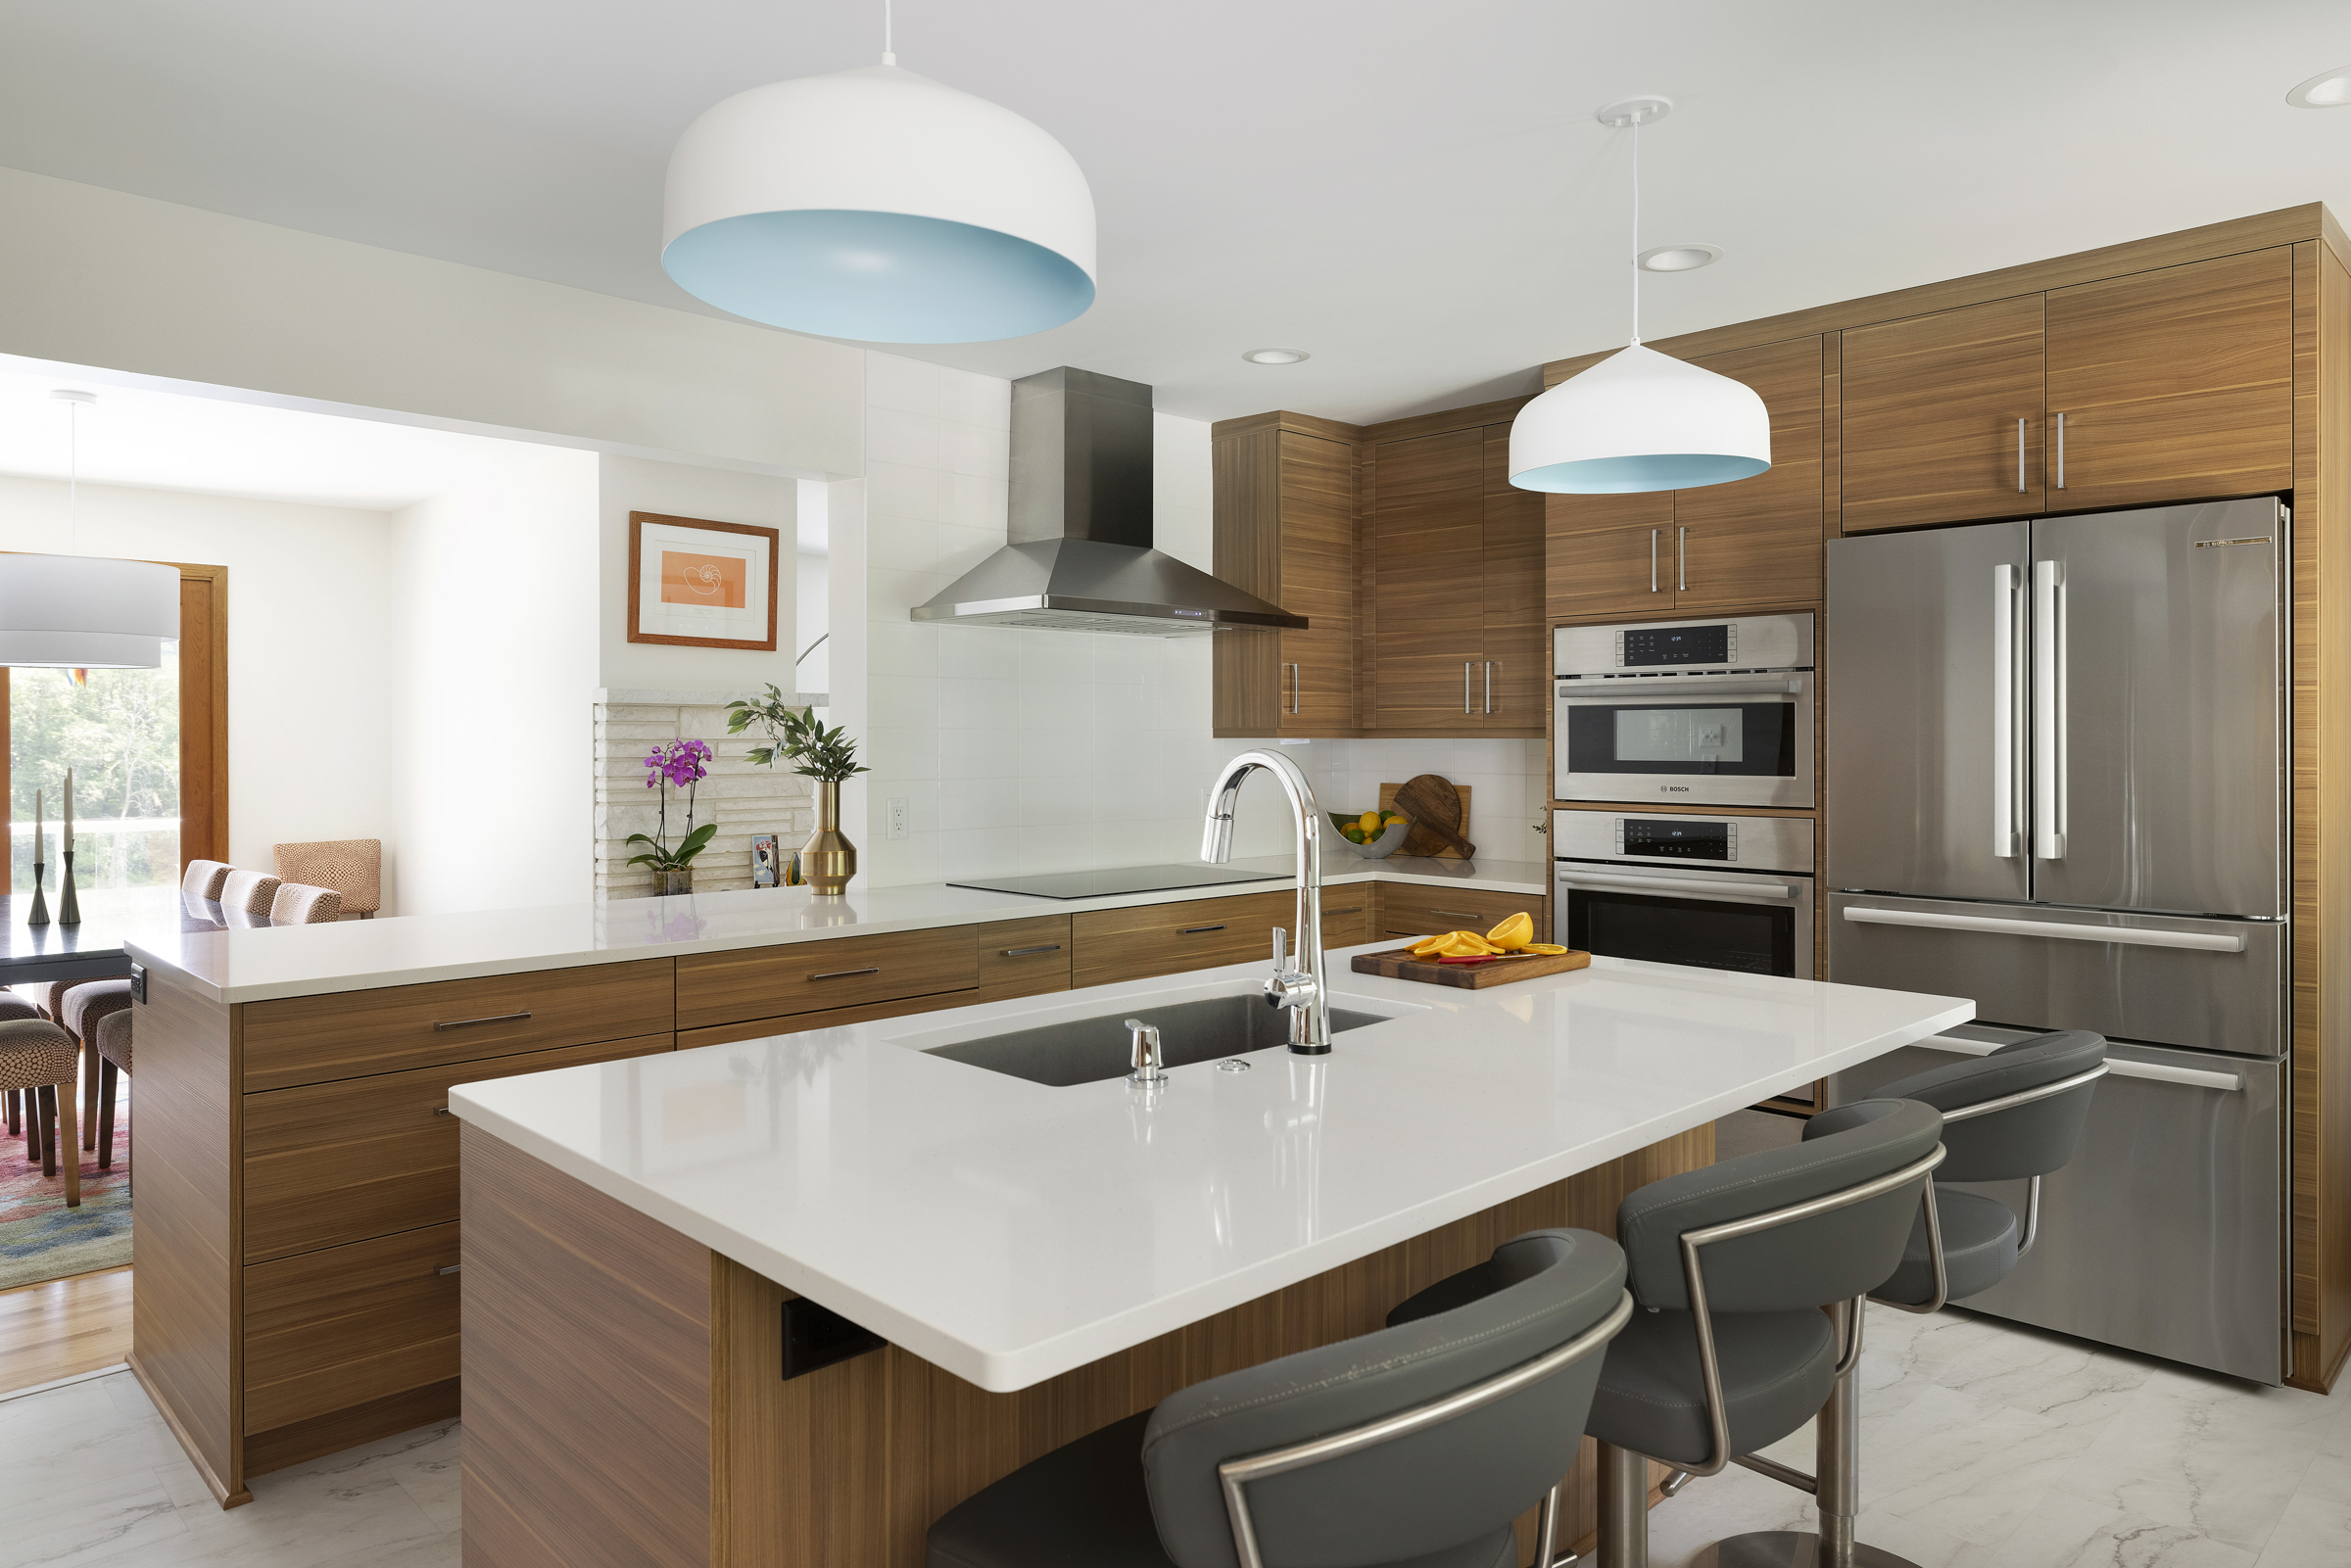 Modern kitchen remodel with medium toned wood cabinets, white countertops, and stainless steel appliances